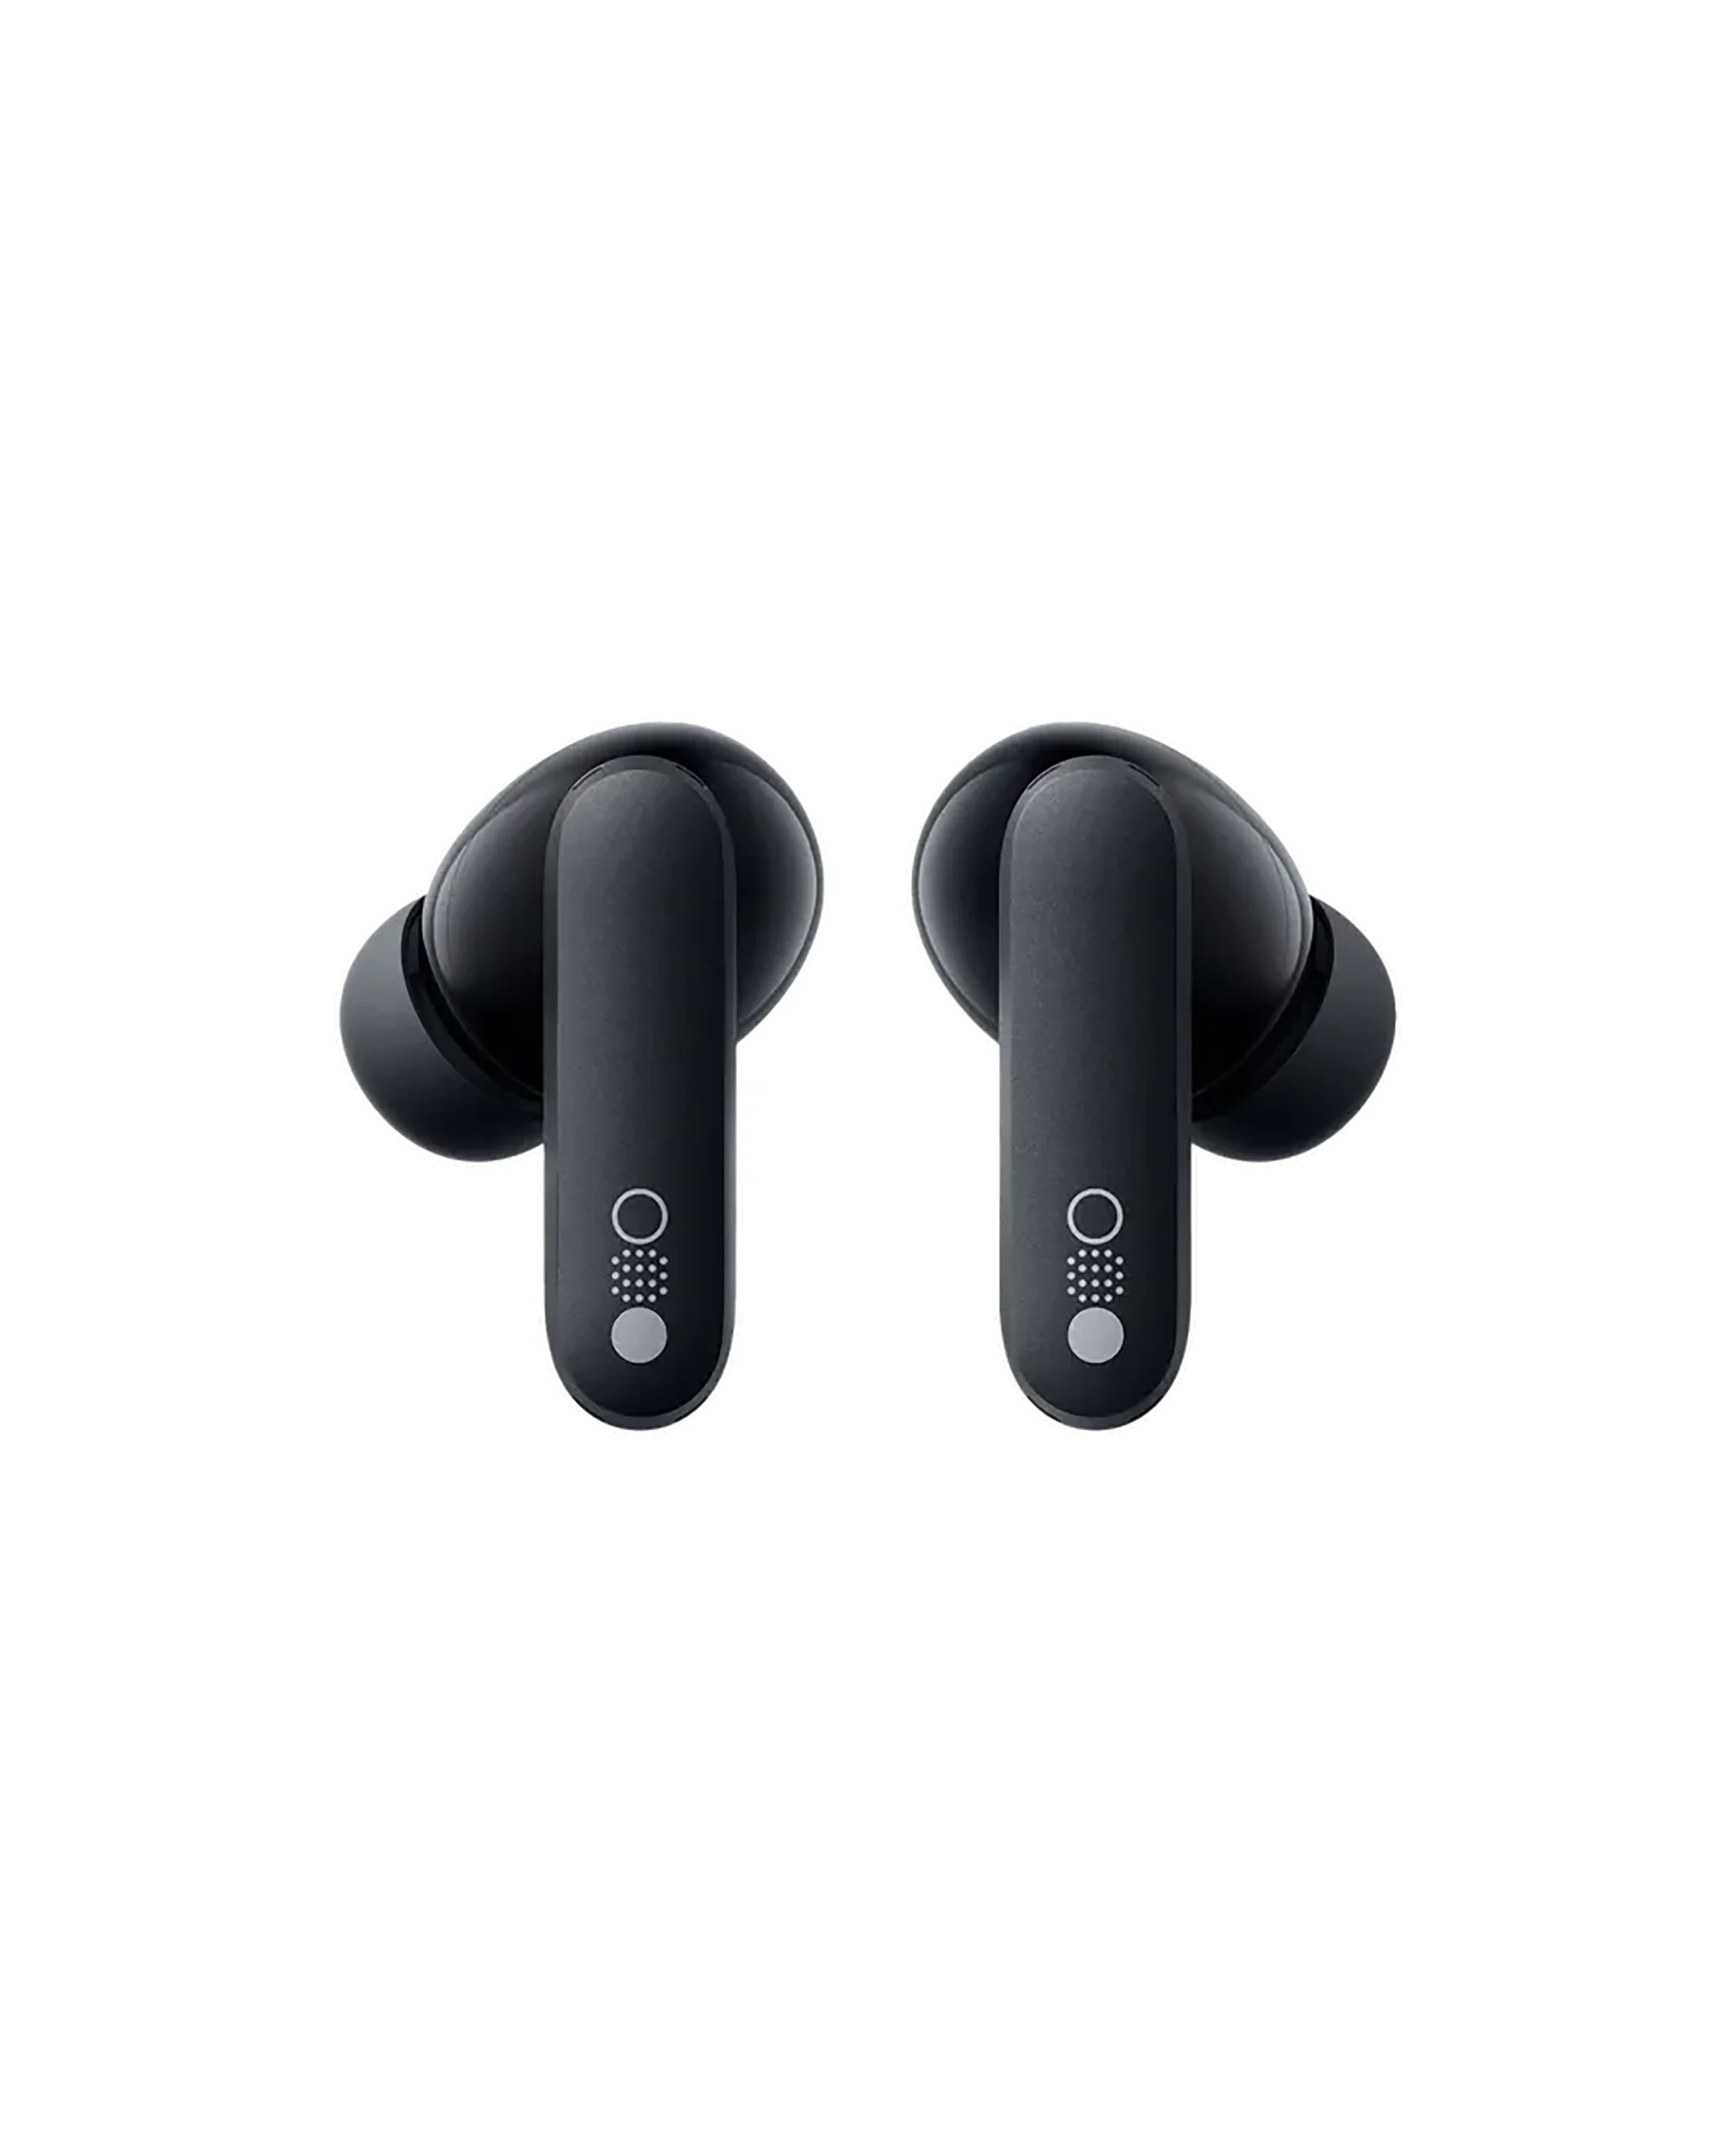  CMF BY NOTHING Buds PRO Wireless Earbuds Bluetooth 5.3,  Bluetooth Headphones Active Noise Cancelling to 45 dB, IP54 Waterproof  Earphones Wireless for Android/iOS Phones Grey : Electronics